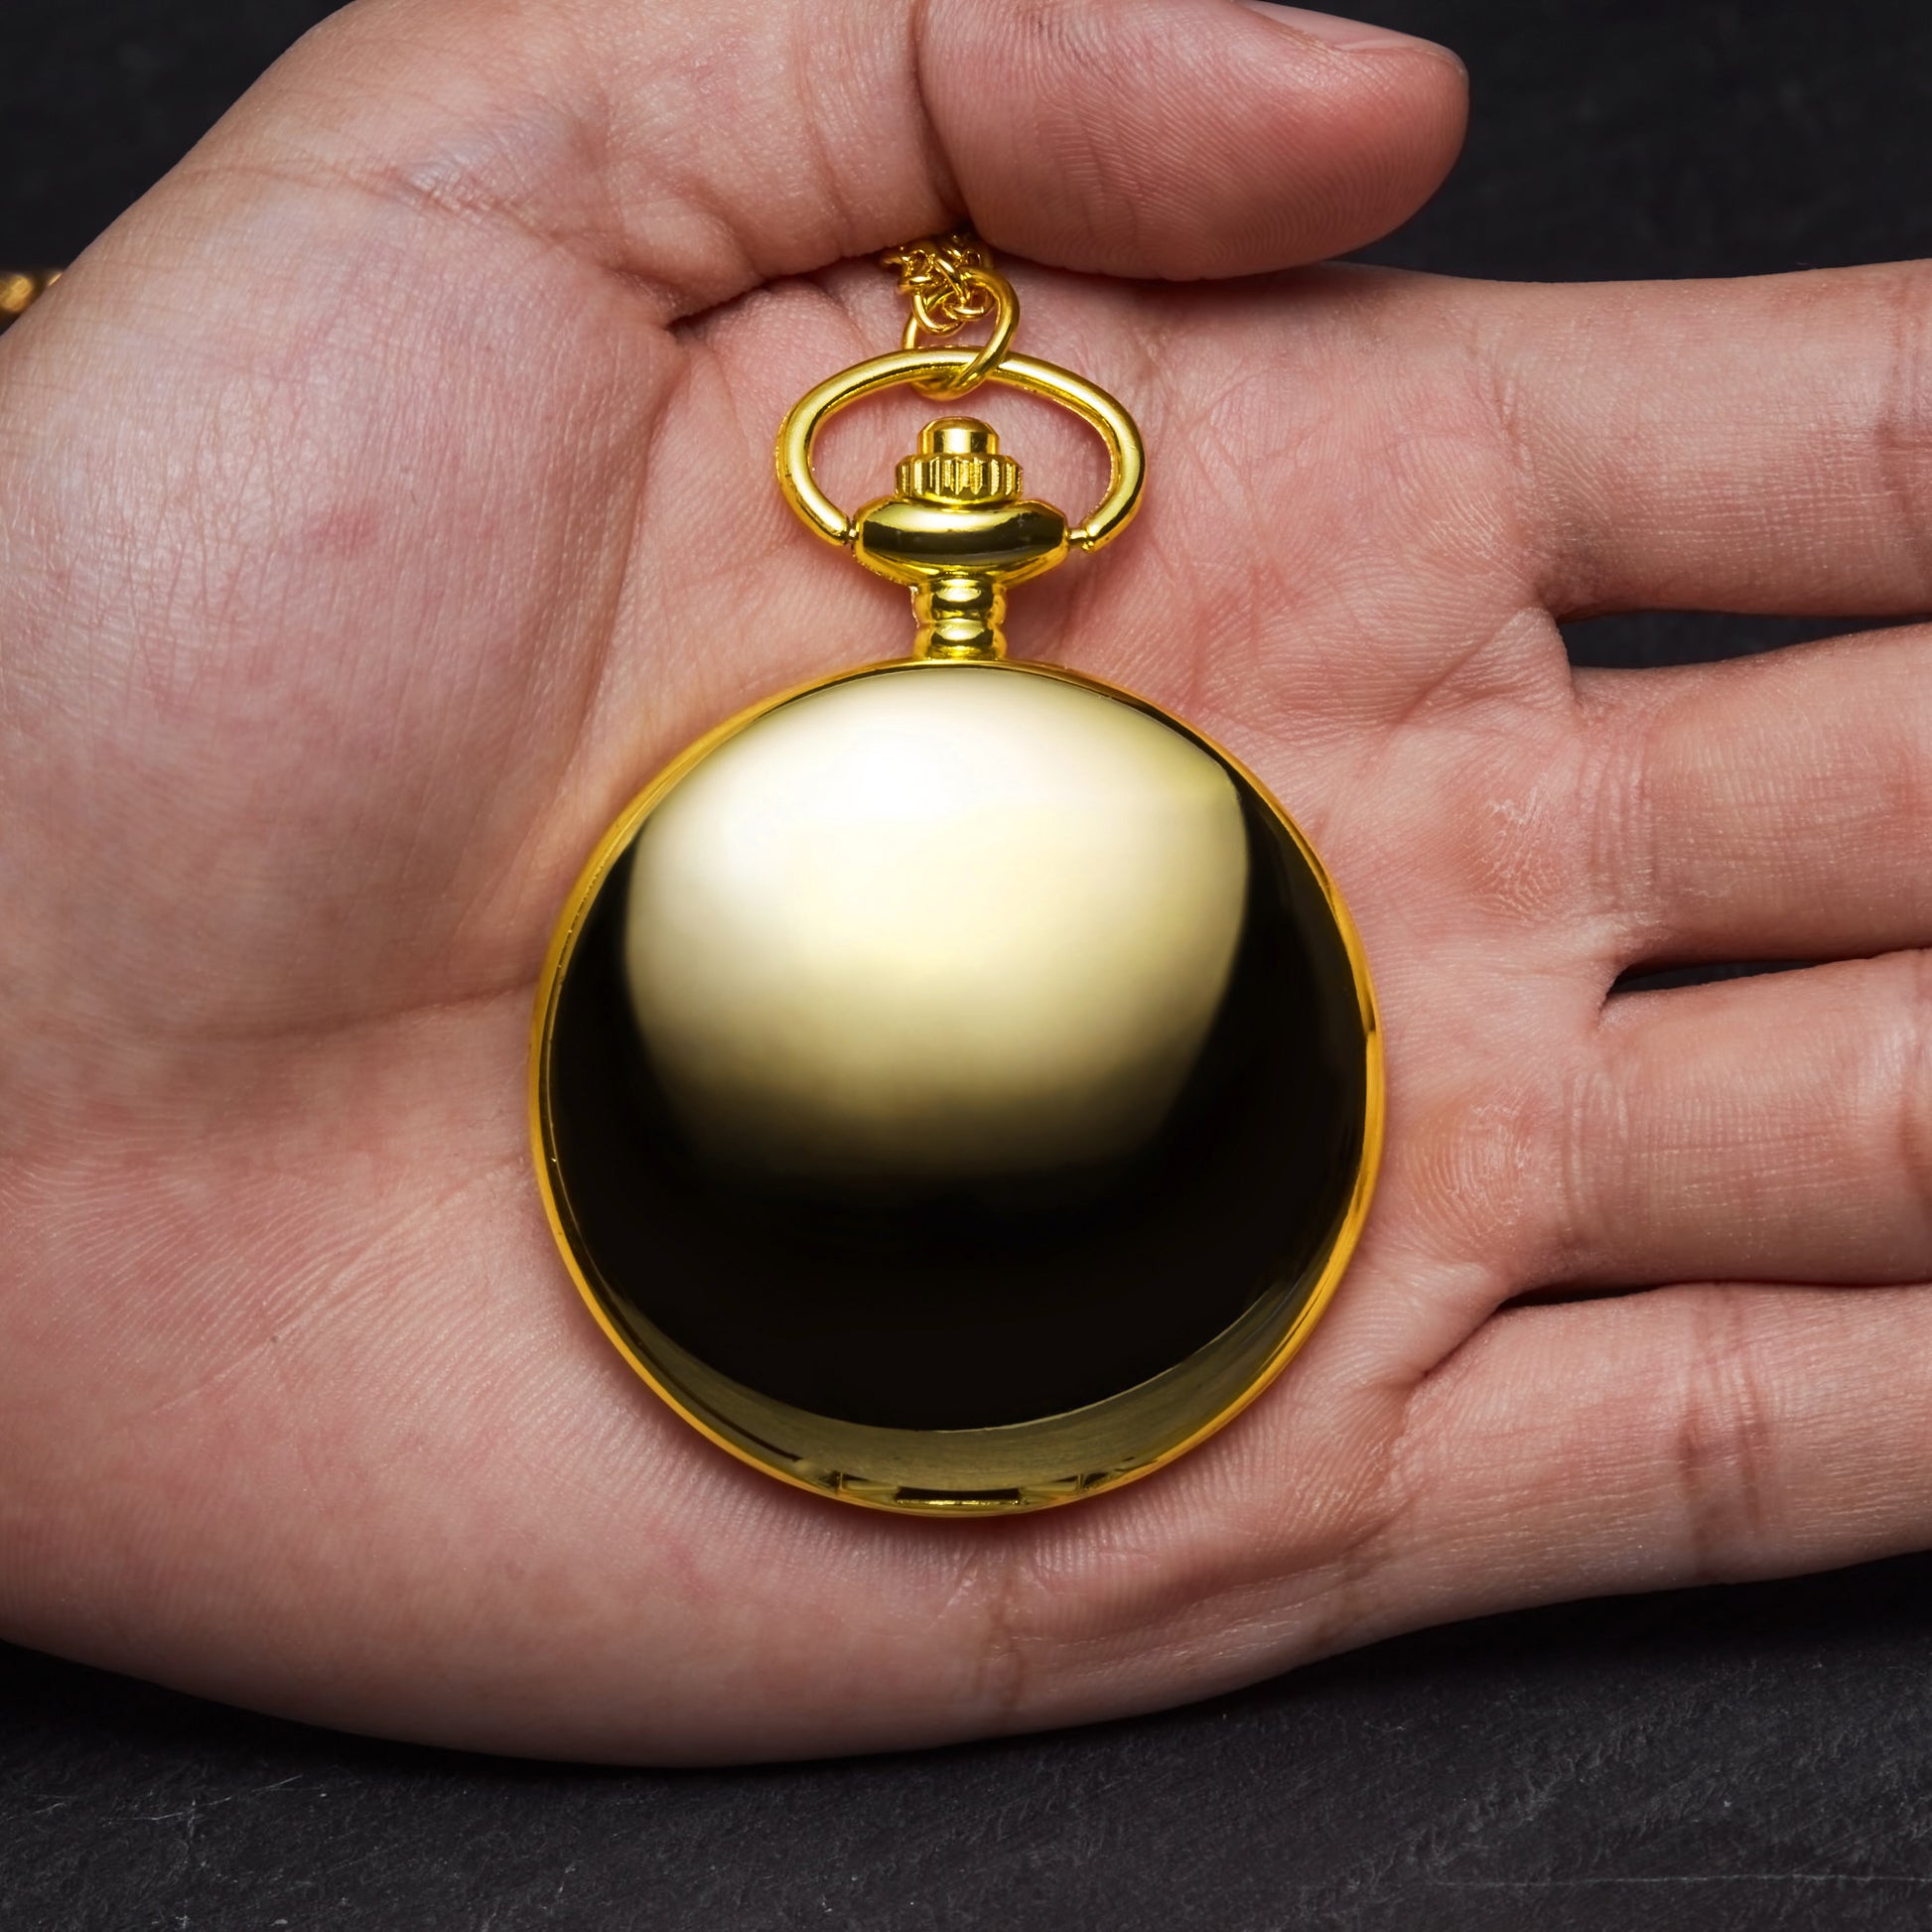 a hand holding a gold colored pocket watch